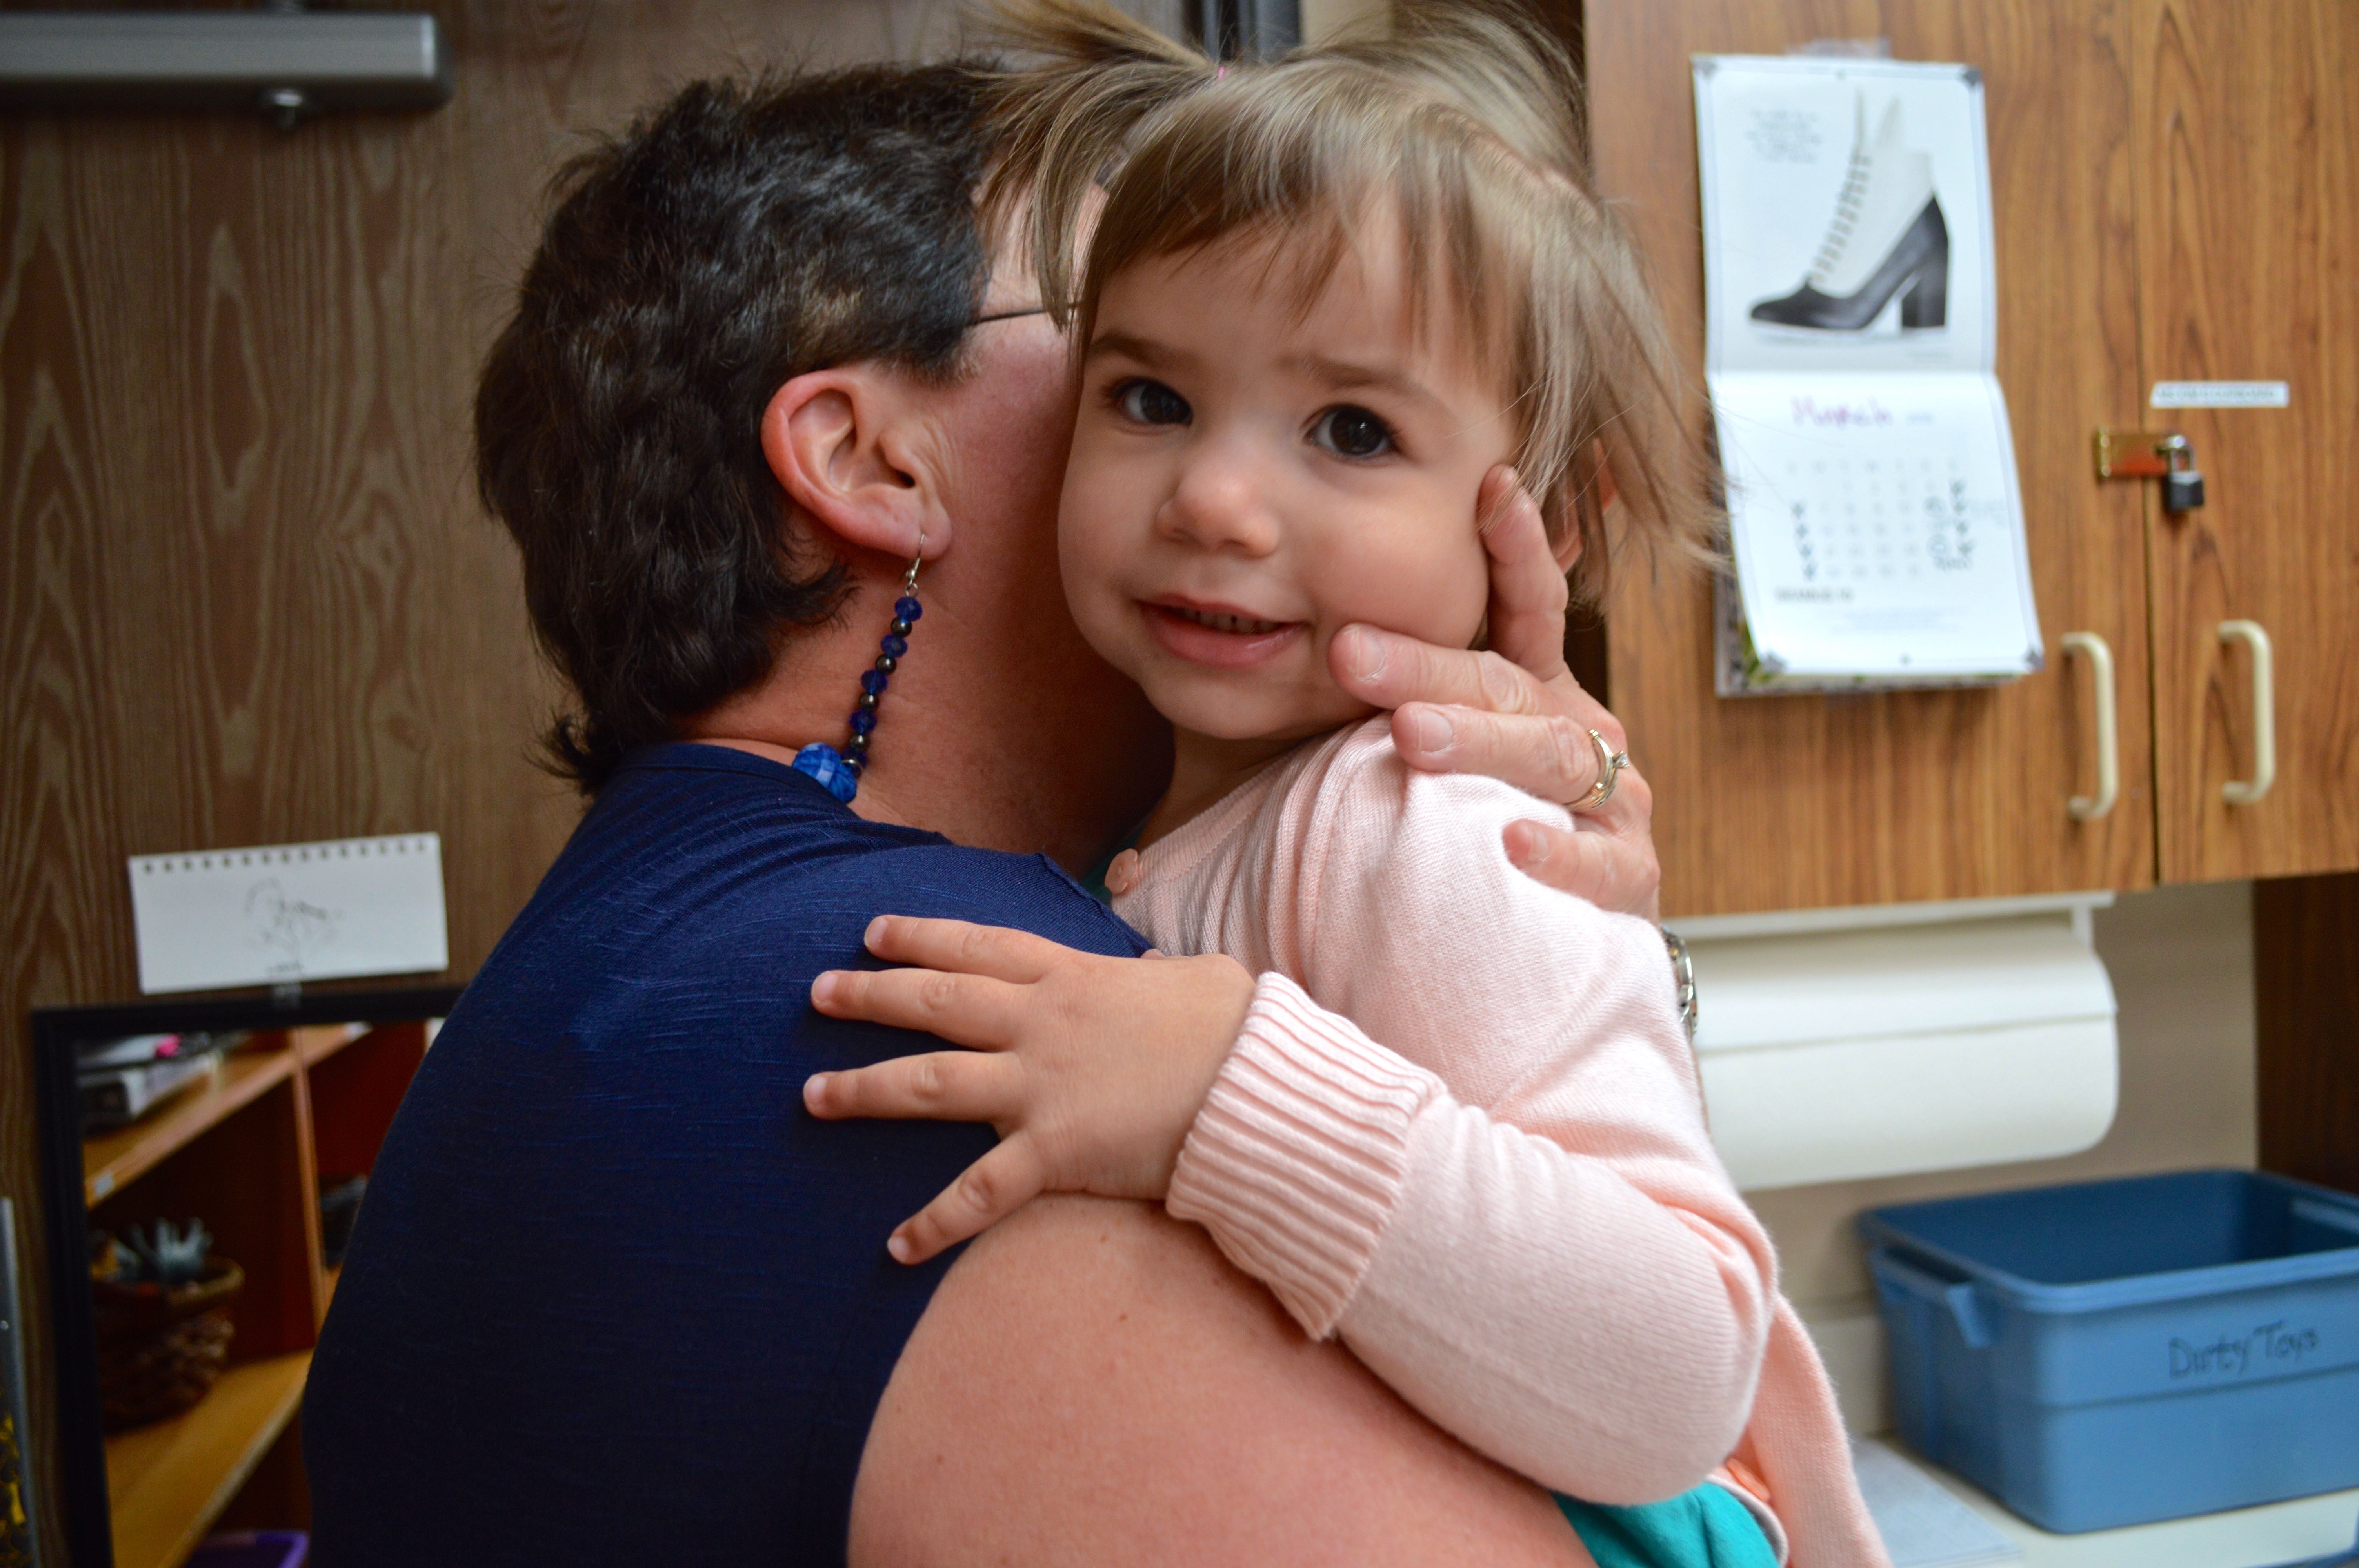 A caretaker hugs Paloma after putting on her shoes. Photo by Shannon Higgins/Arizona Sonora News